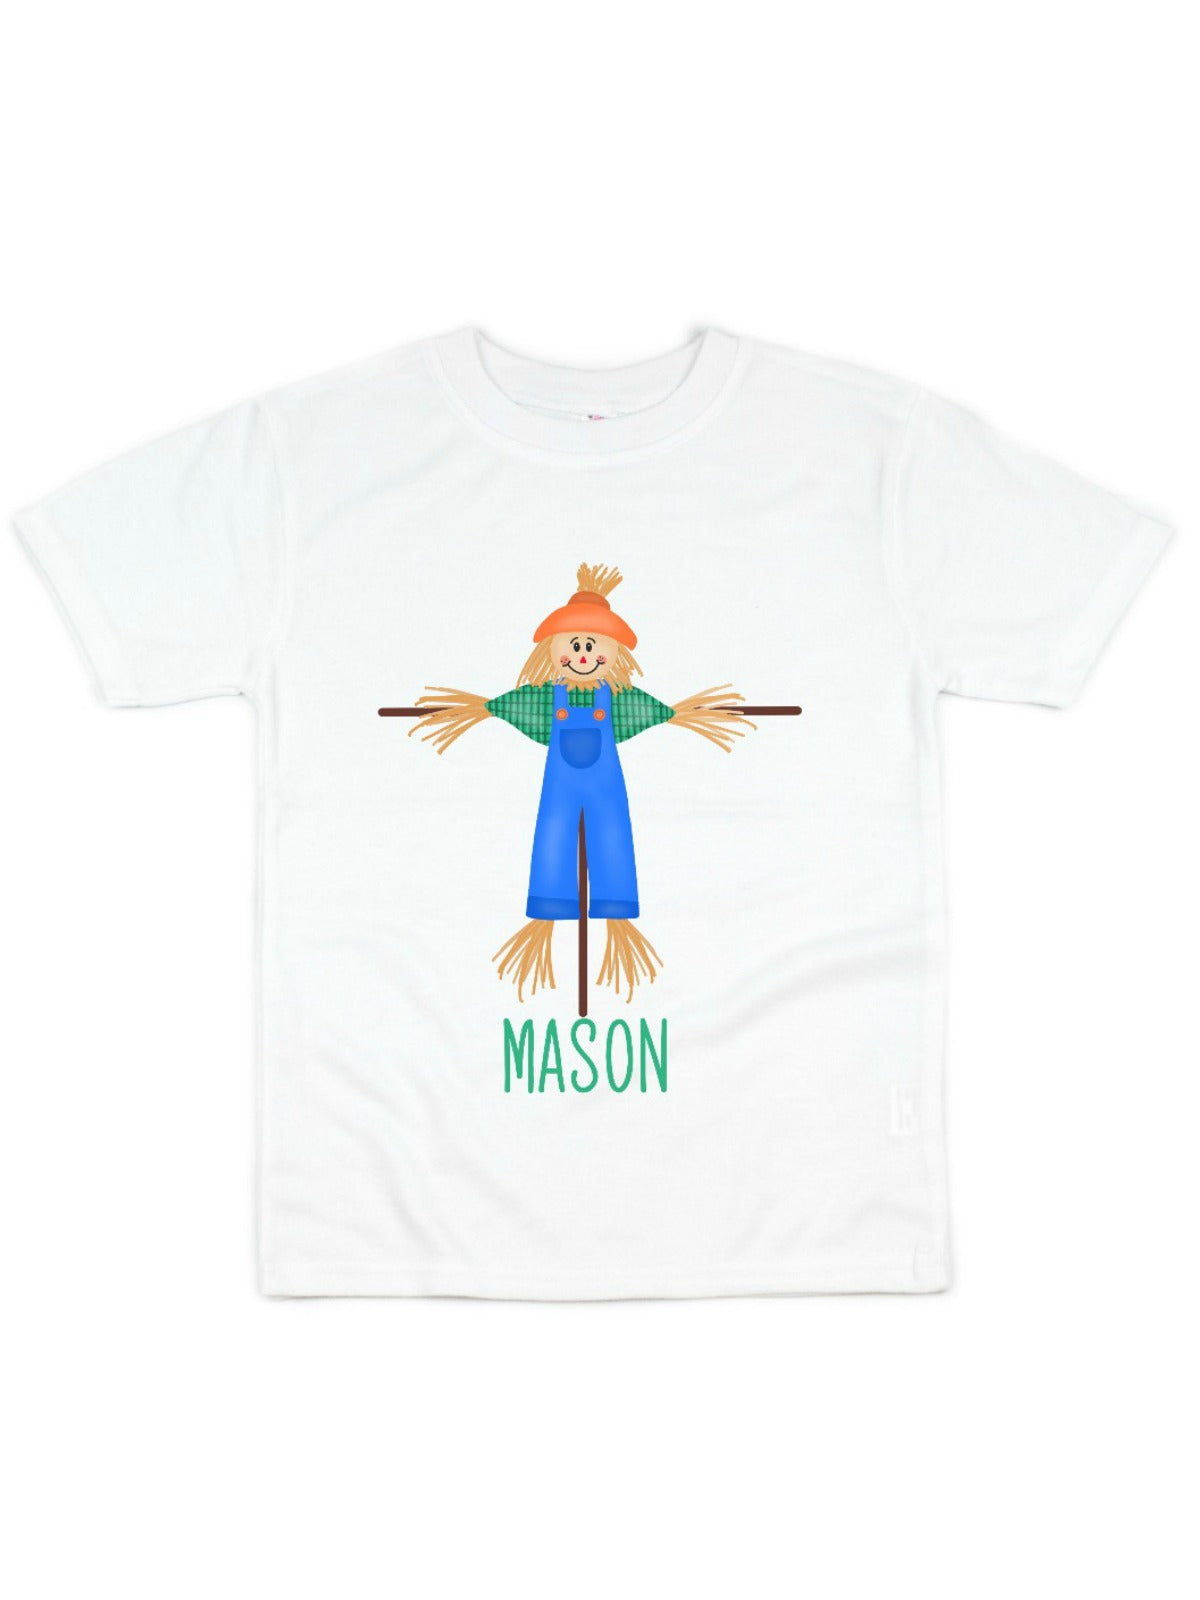 personalized boys fall scarecrow shirt